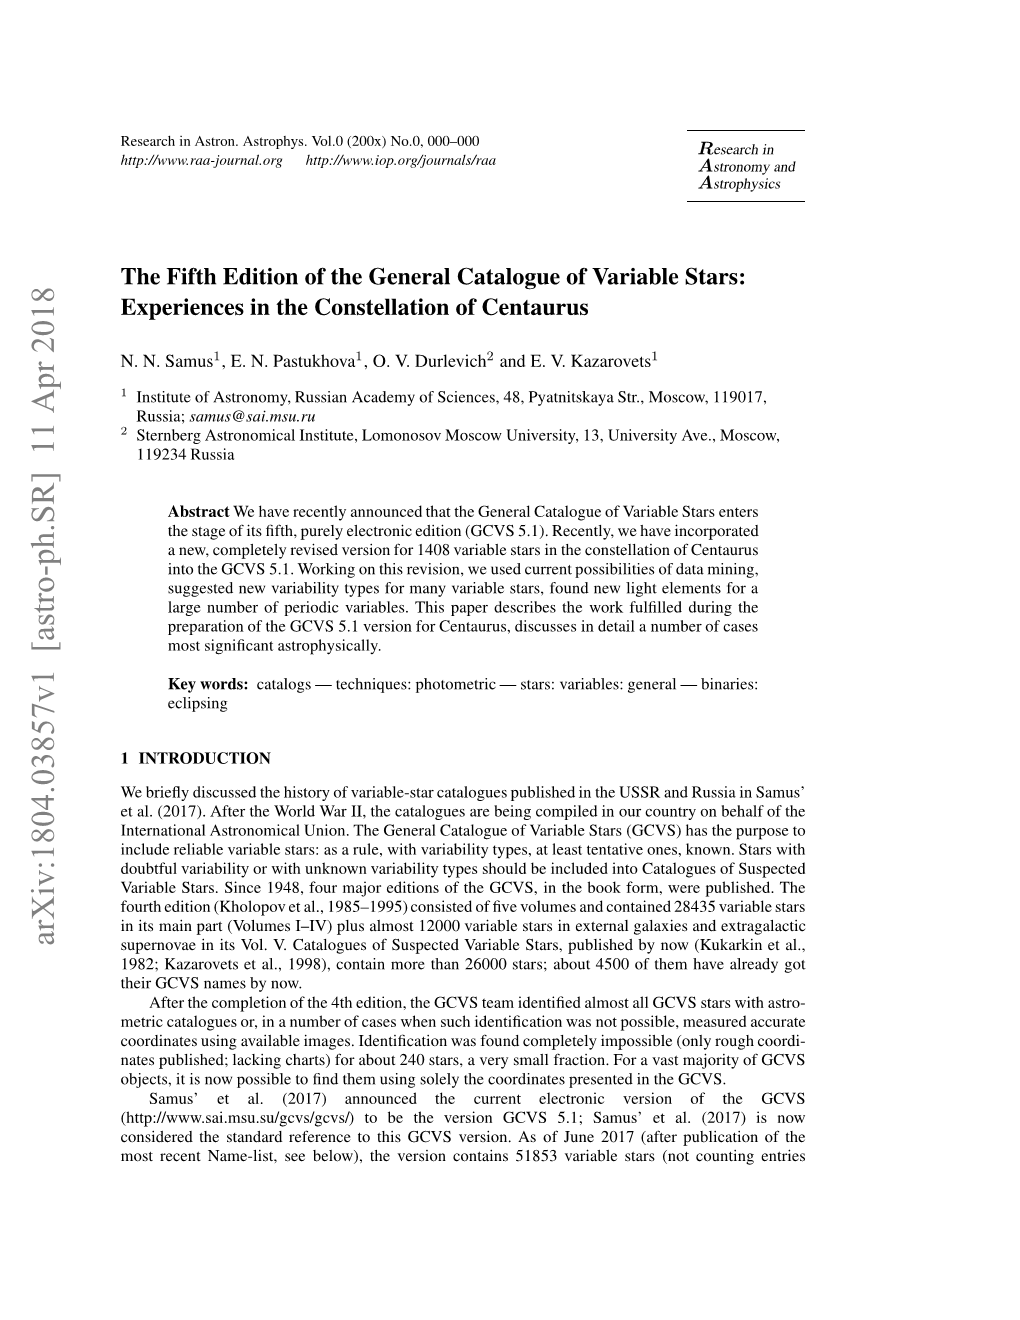 The Fifth Edition of the General Catalogue of Variable Stars